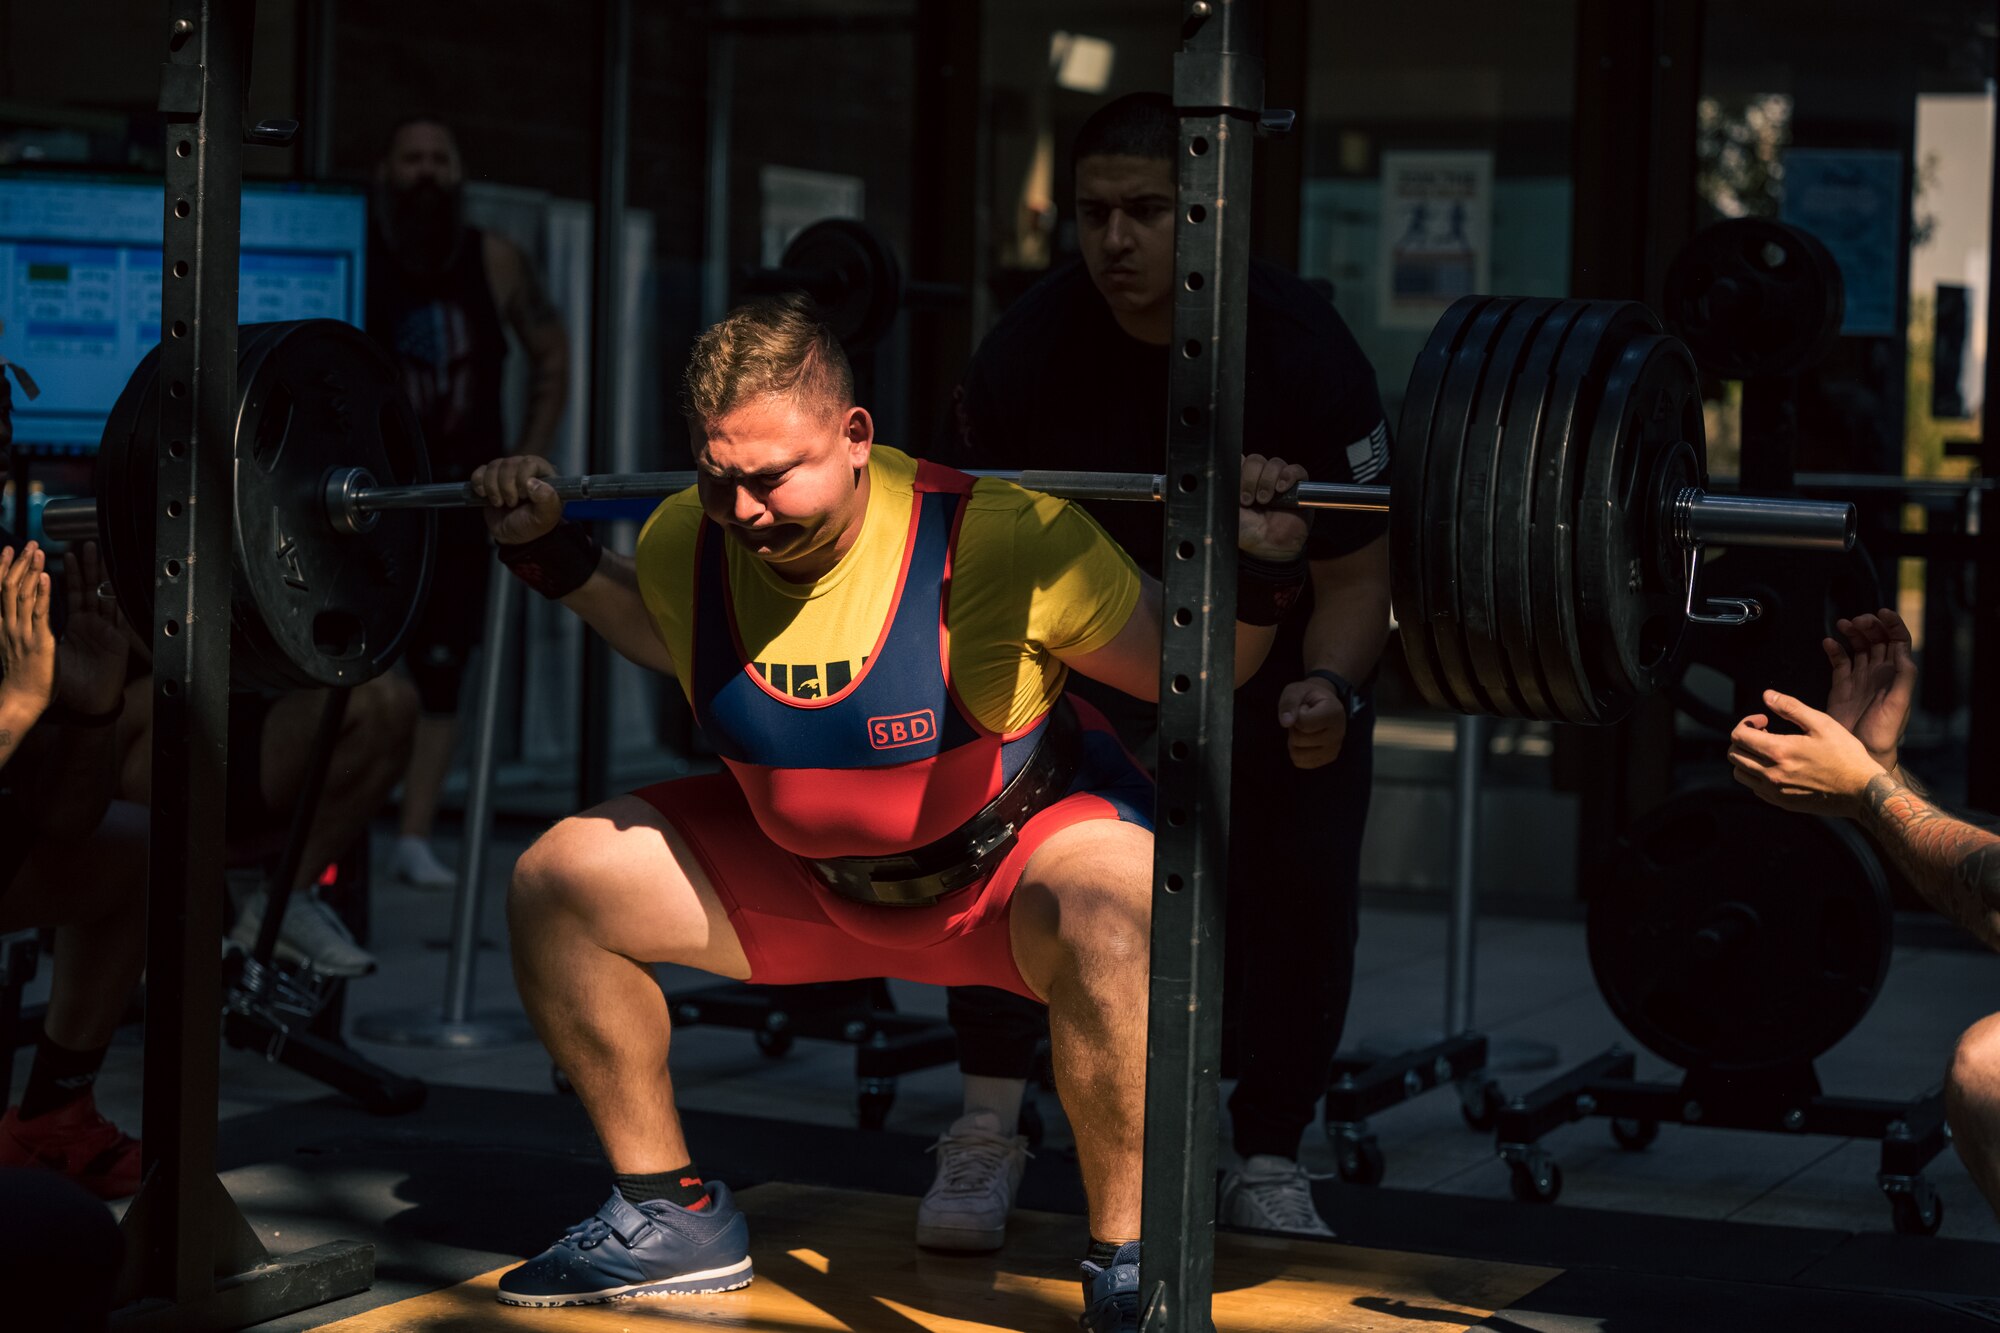 U.S. Air Force Tech Sgt. Forrest Emmal, 849th Aircraft Maintenance Squadron specialist flight chief, performs a back squat during a weightlifting meet at Holloman Air Force Base, New Mexico, July 8, 2023. Emmal earned the top male competitor award for the event. (U.S. Air Force photo by Senior Airman Antonio Salfran)